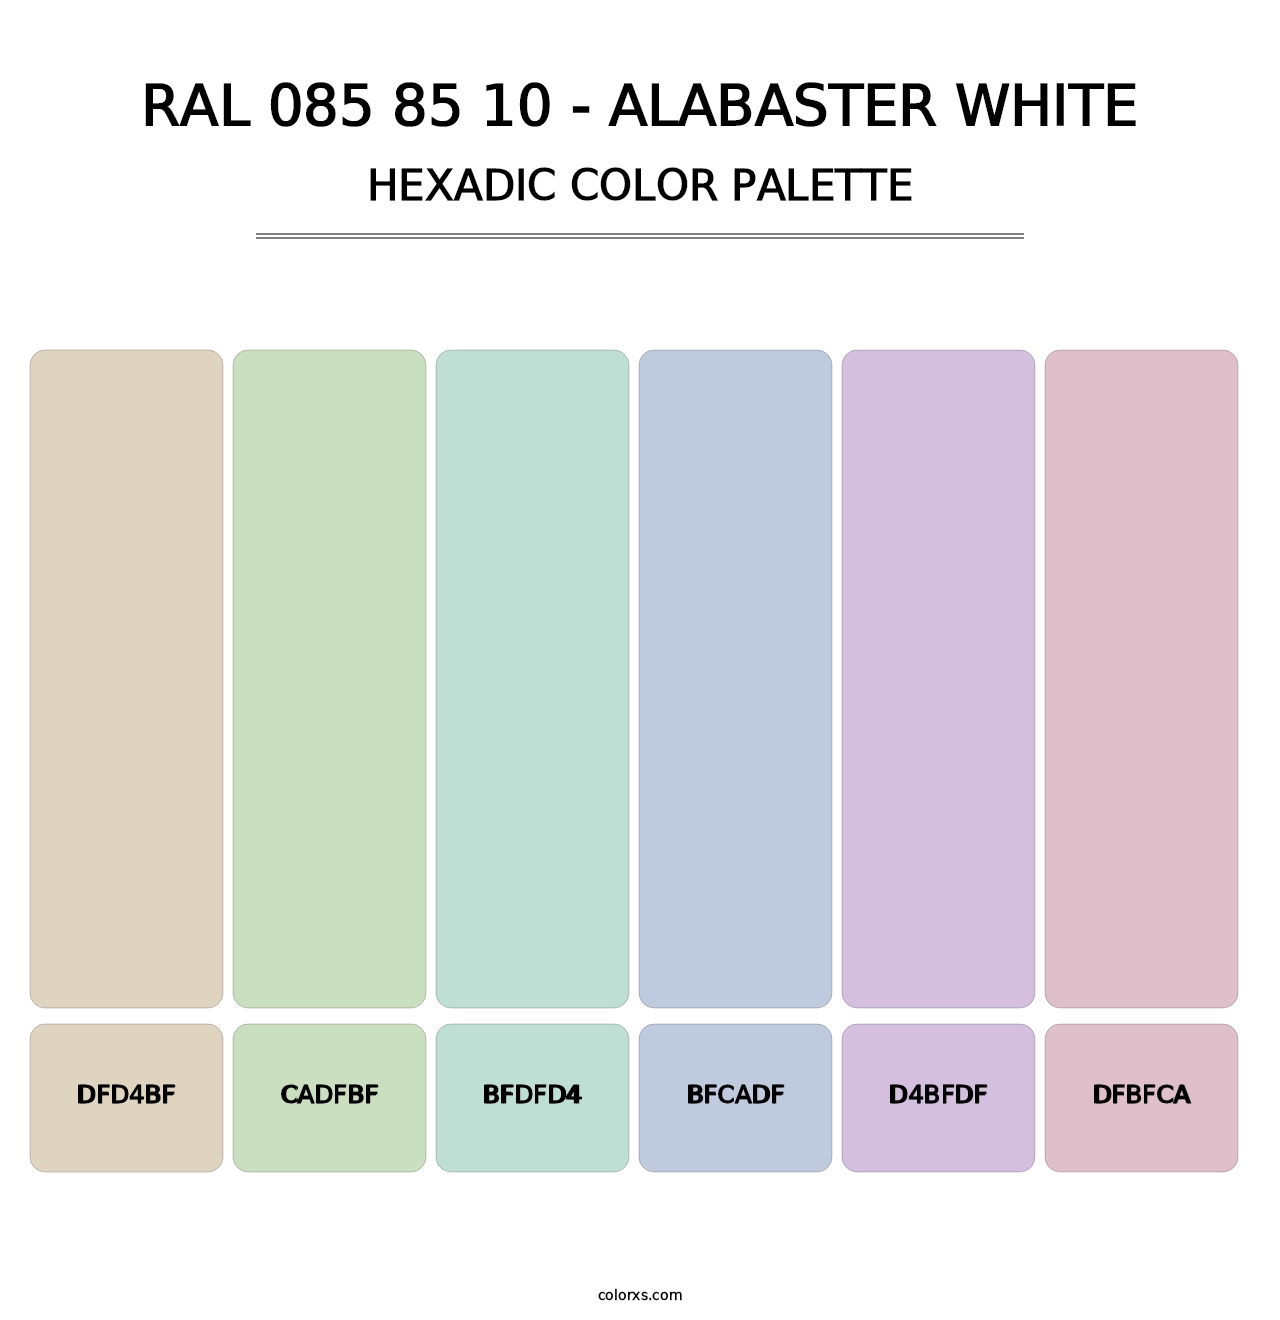 RAL 085 85 10 - Alabaster White - Hexadic Color Palette